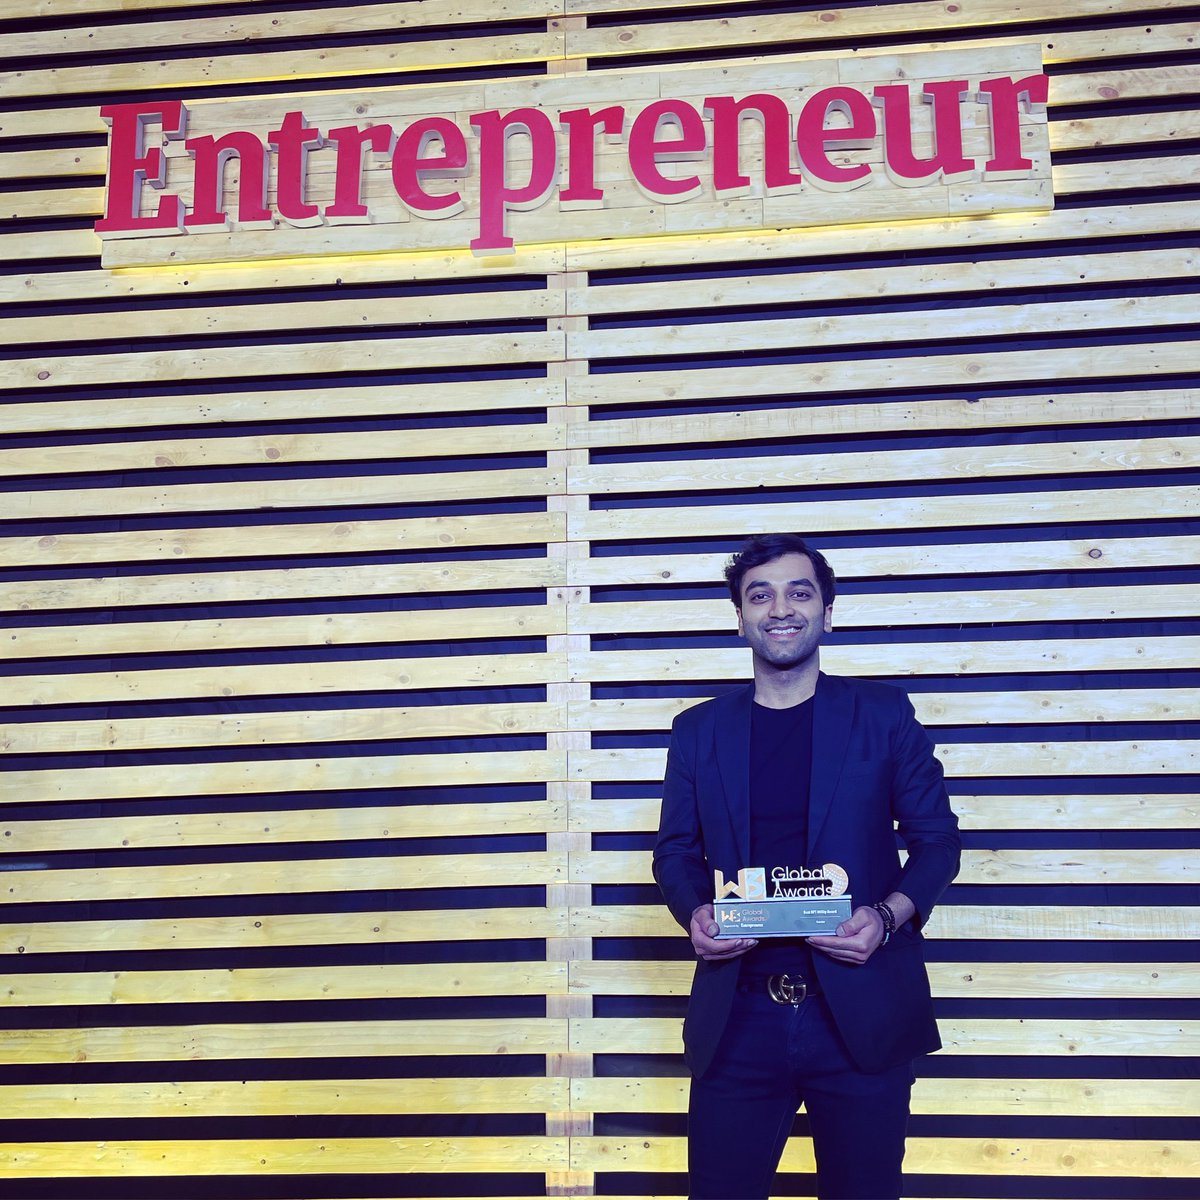 What a journey 🚀

Fanztar won the “Best NFT Utility of the Year” Award at W3 Global Awards by Entrepreneur India
@EntrepreneurIND @fanztar 

#entrepreneur #entrepreneurship #entrepreneurindia #web3 #w3globalawards2023 #fanztar #nft